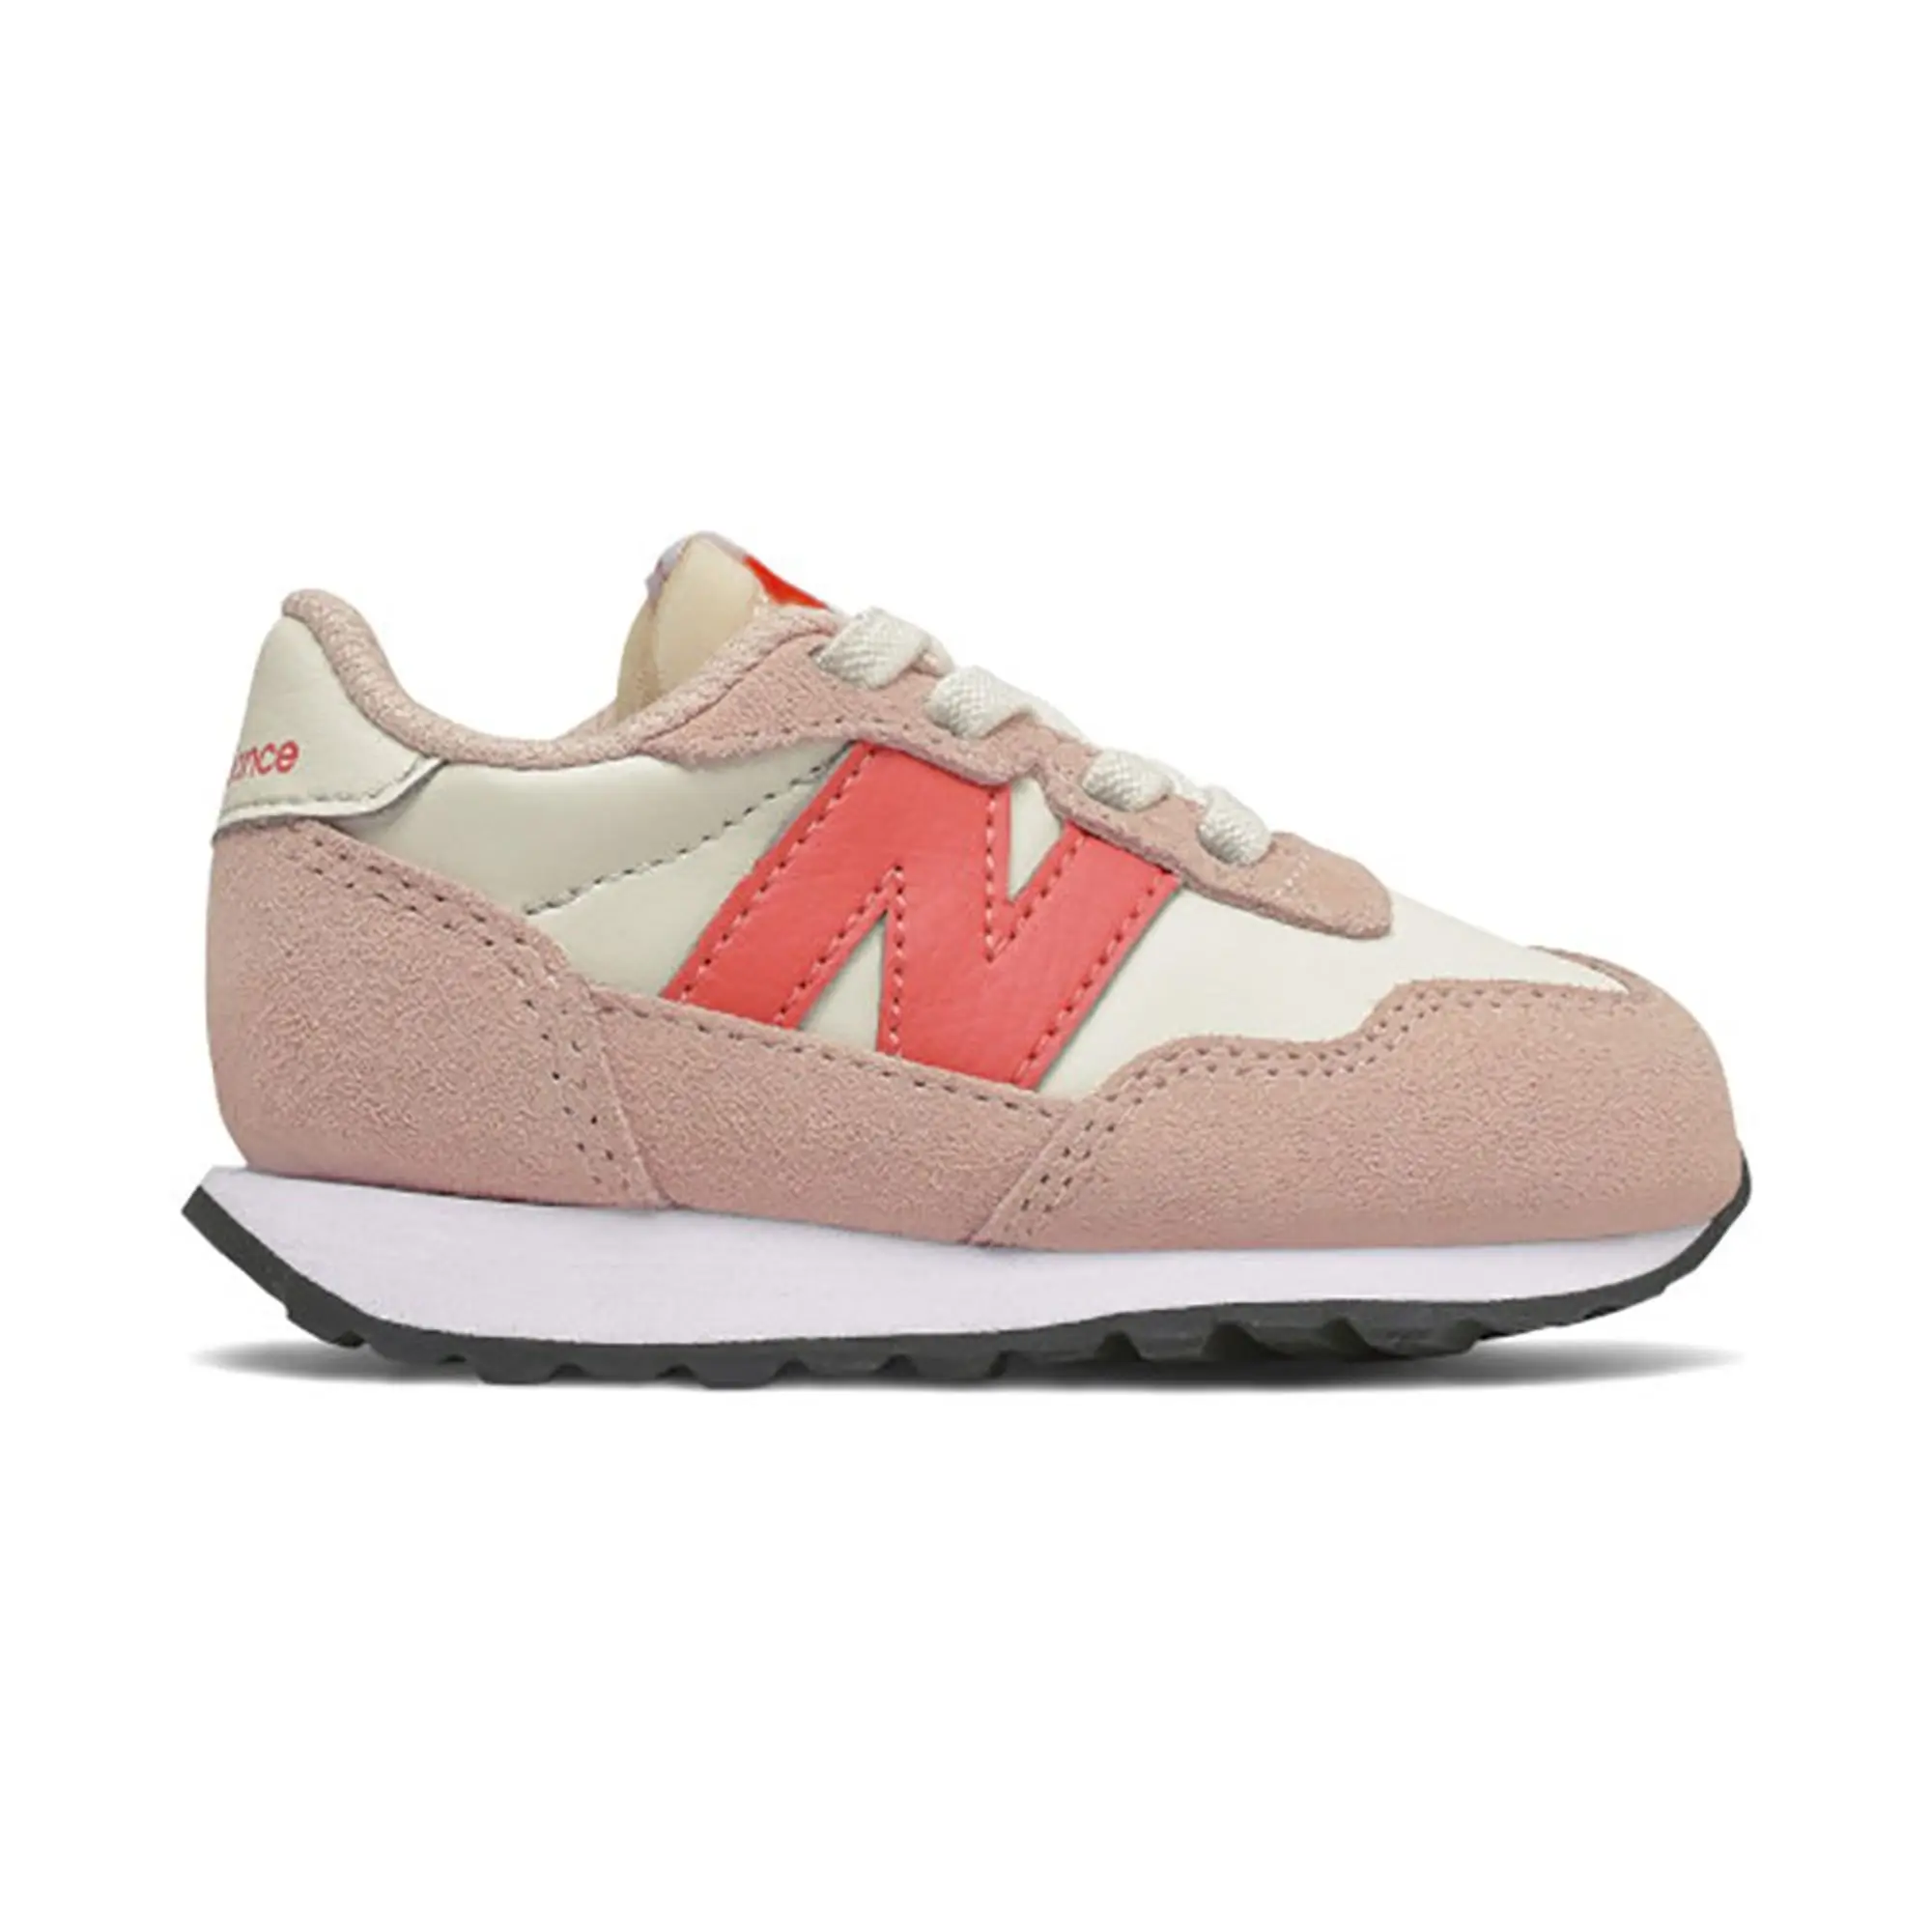 New Balance Infants' 237 Bungee in Grey/Gris/Pink/Rose Synthetic